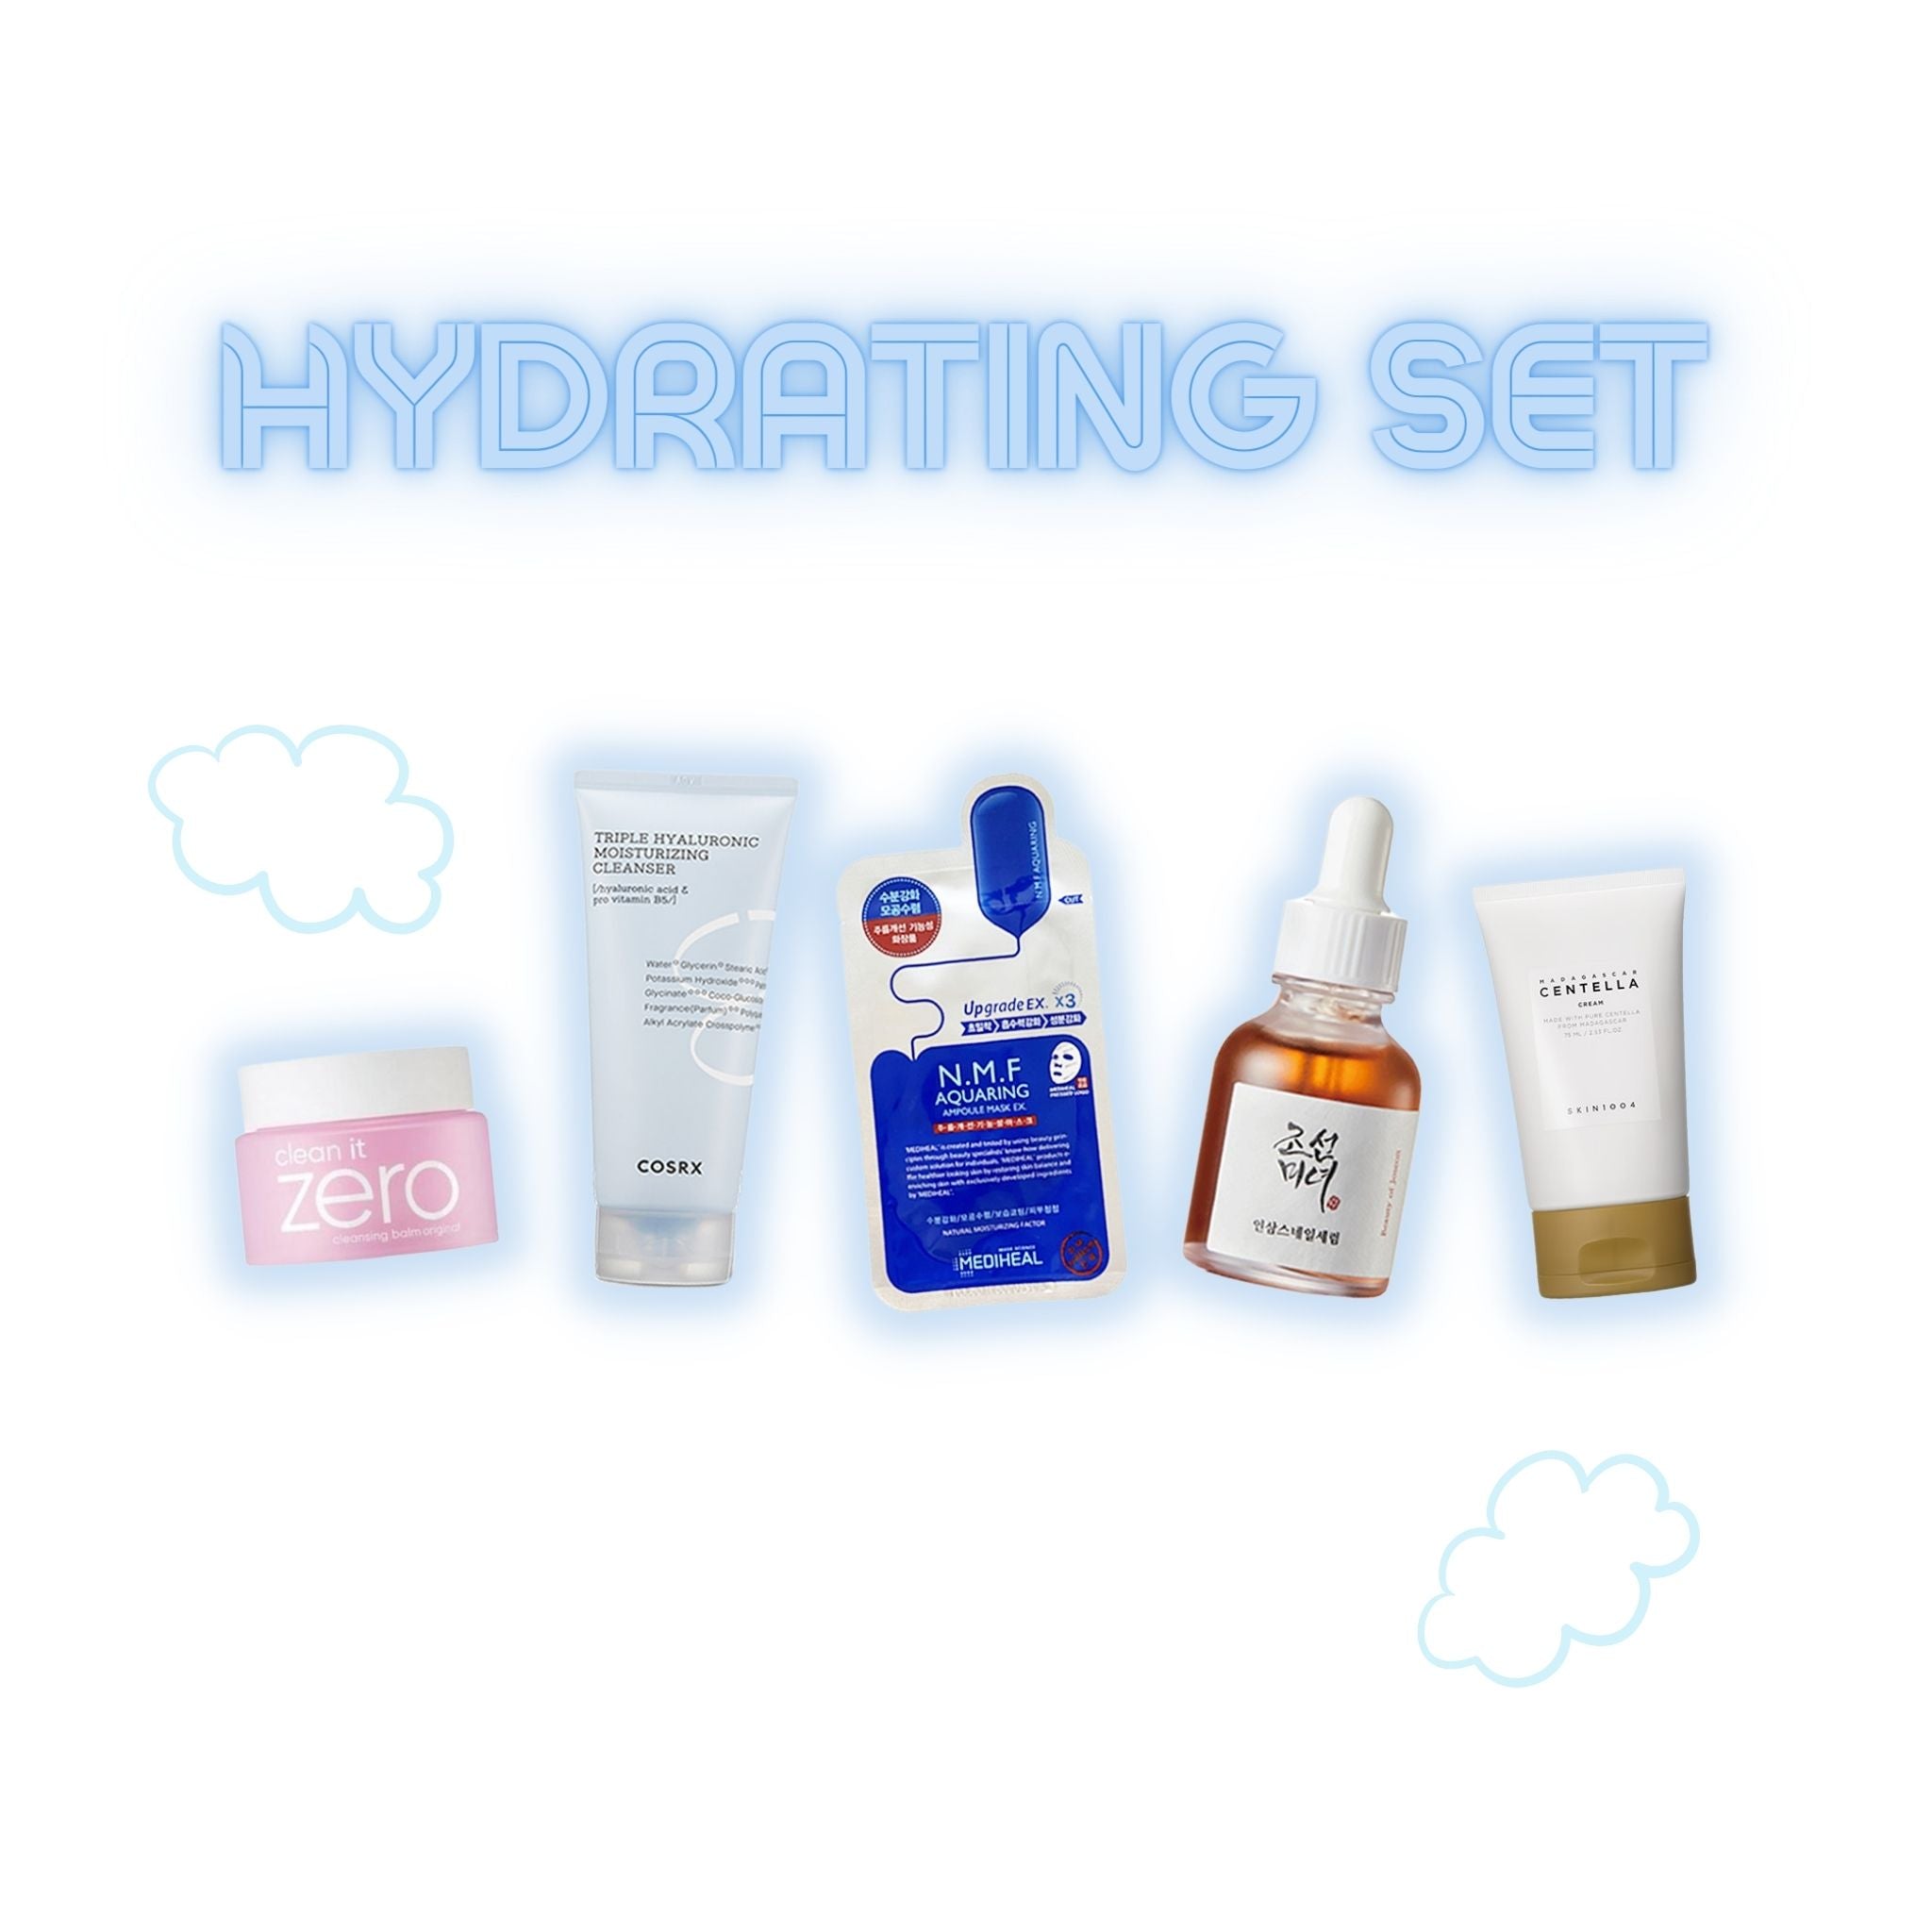 Hydrating skincare routine (5PC)